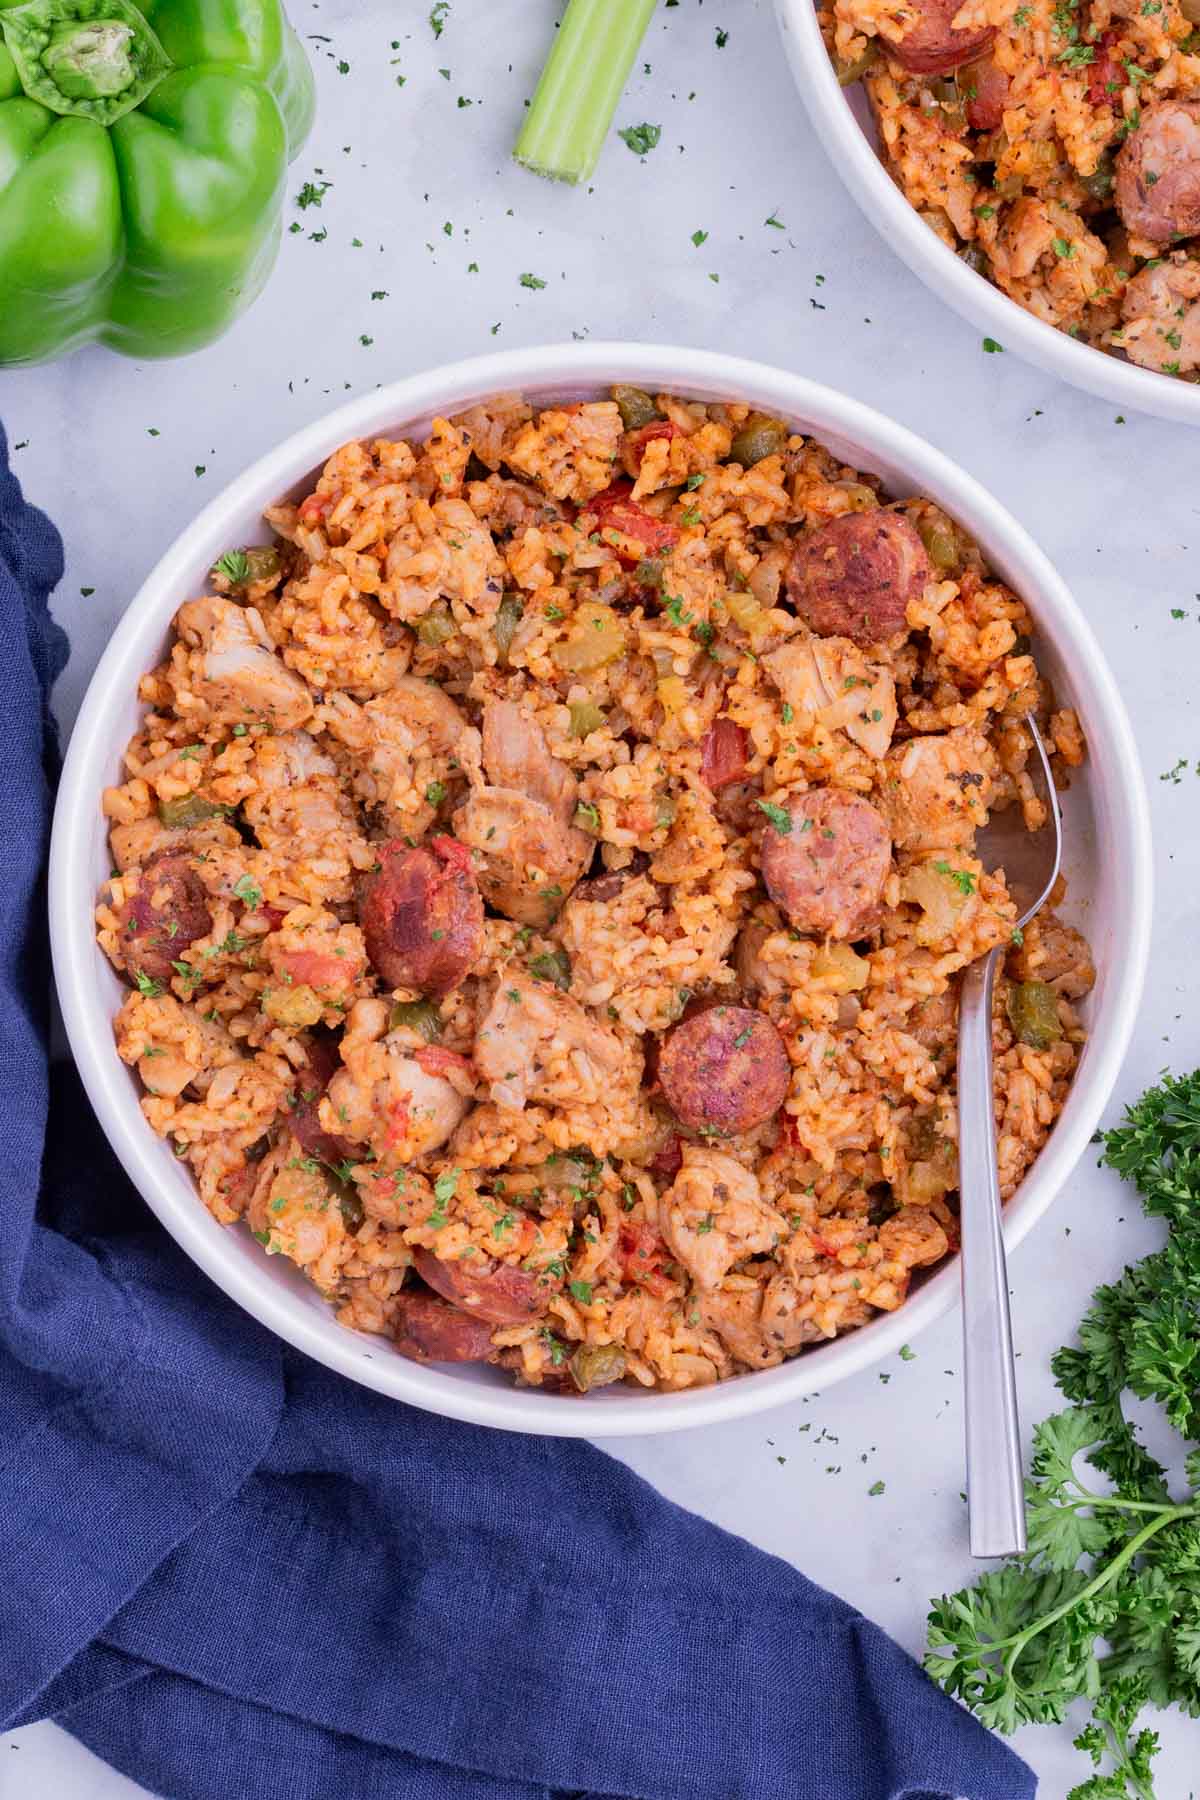 Chicken and sausage jambalaya is served in a white bowl.